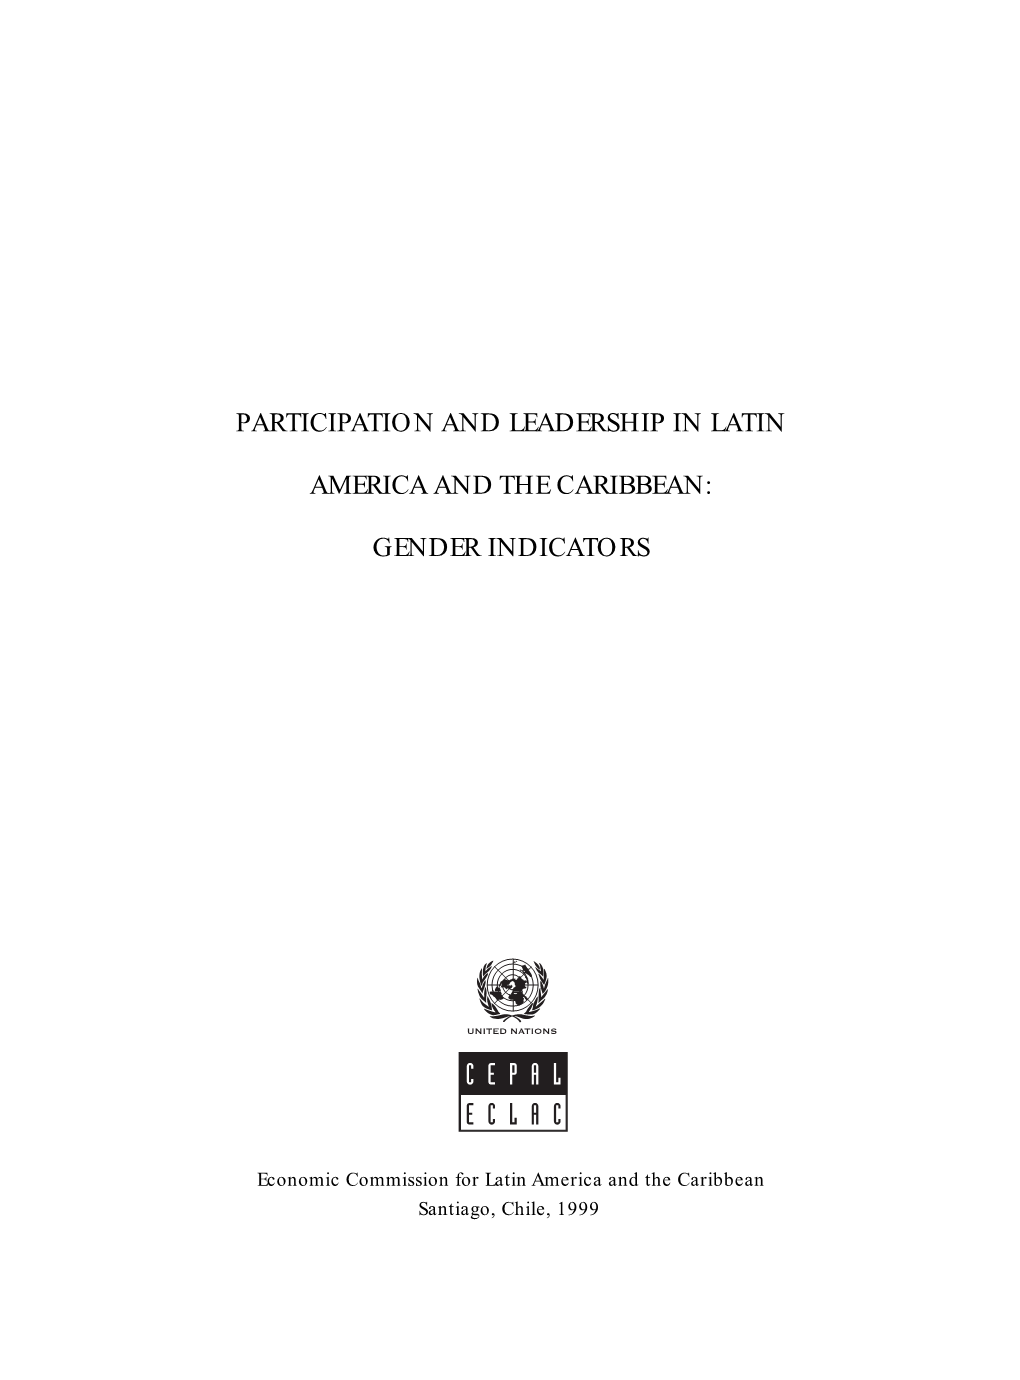 Participation and Leadership in Latin America and the Caribbean: Gender Indicators